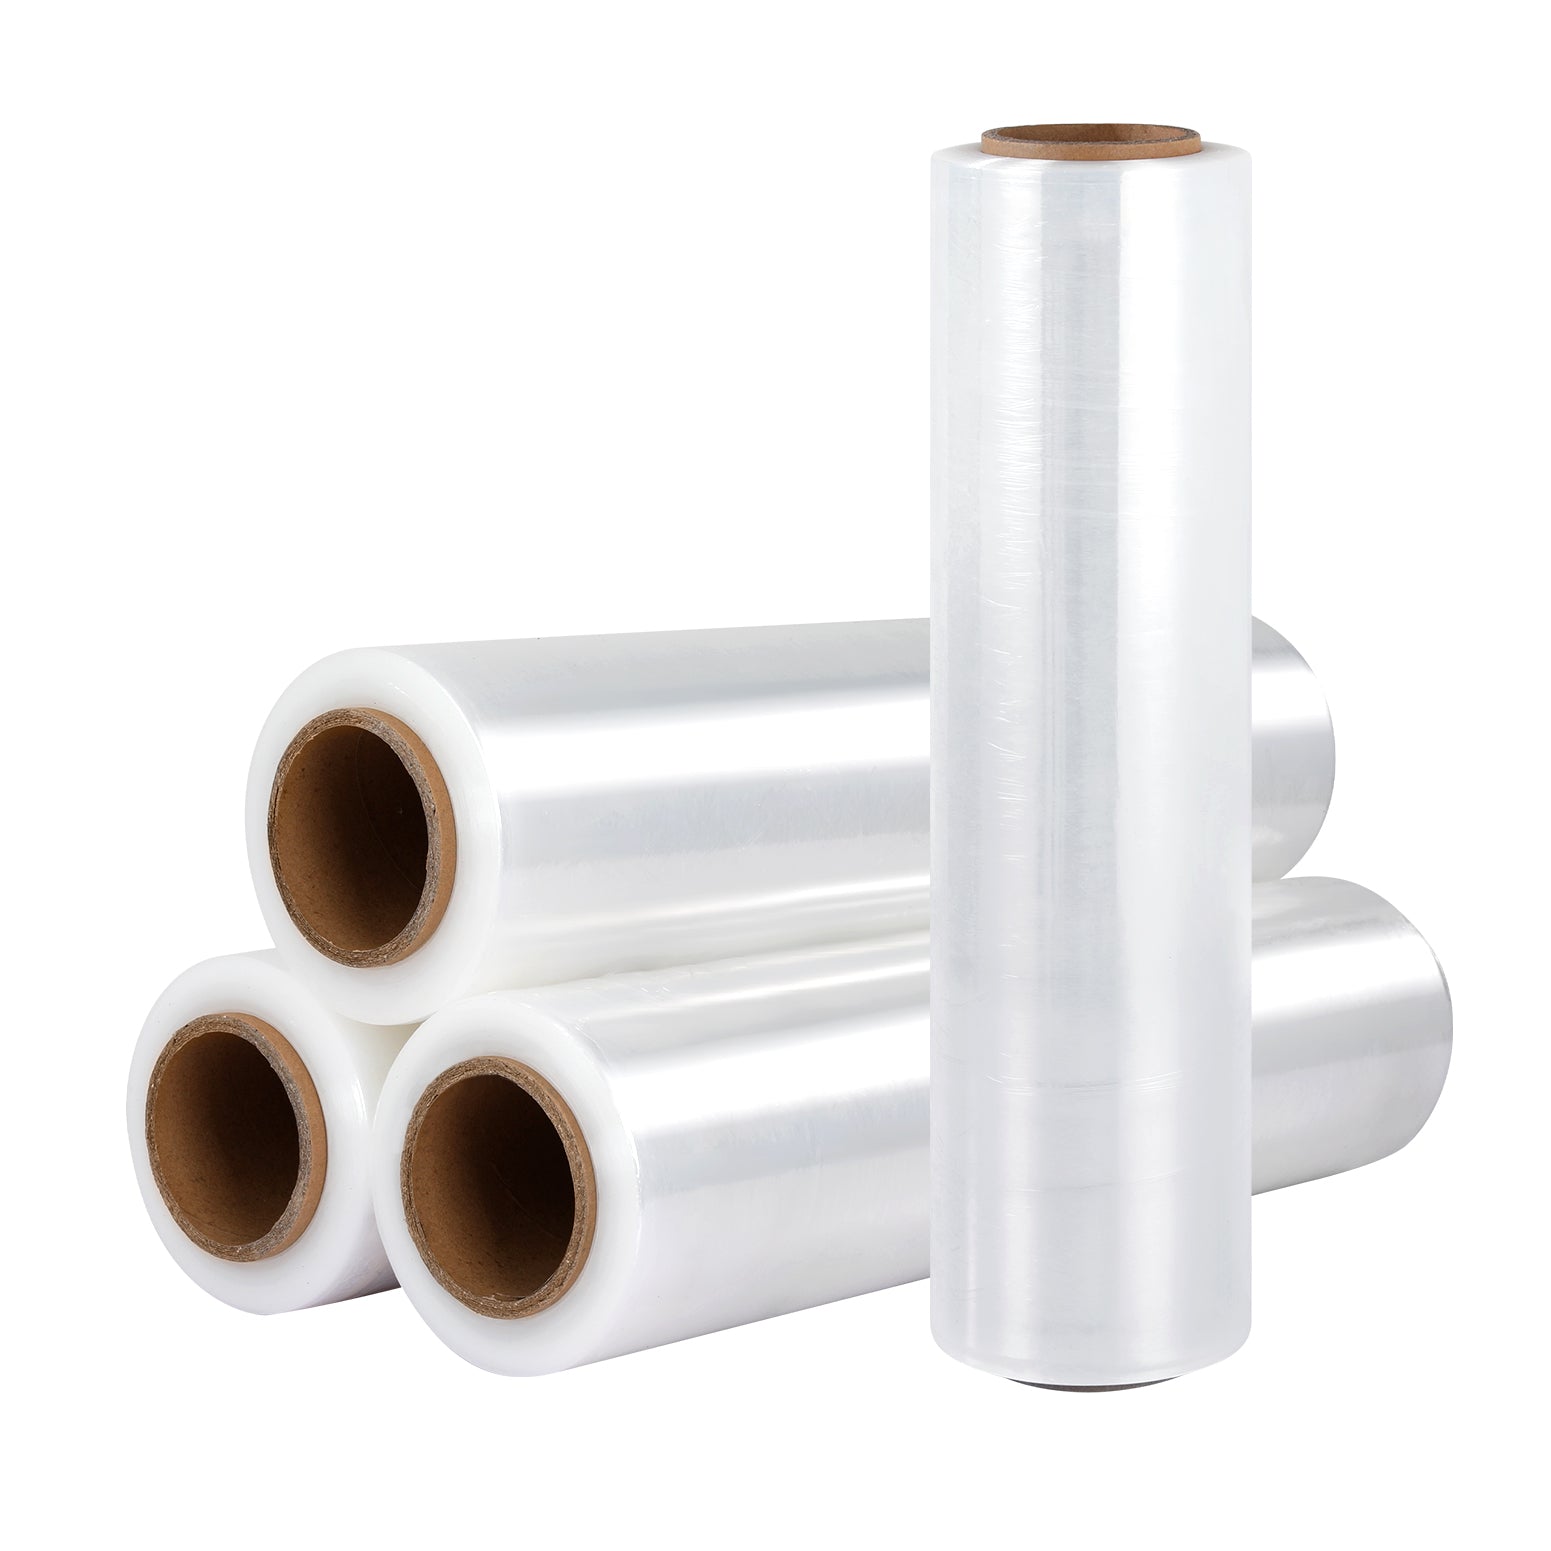 400m 4pcs Stretch Film Shrink Wrap Rolls Protect Package Material Home Warehouse